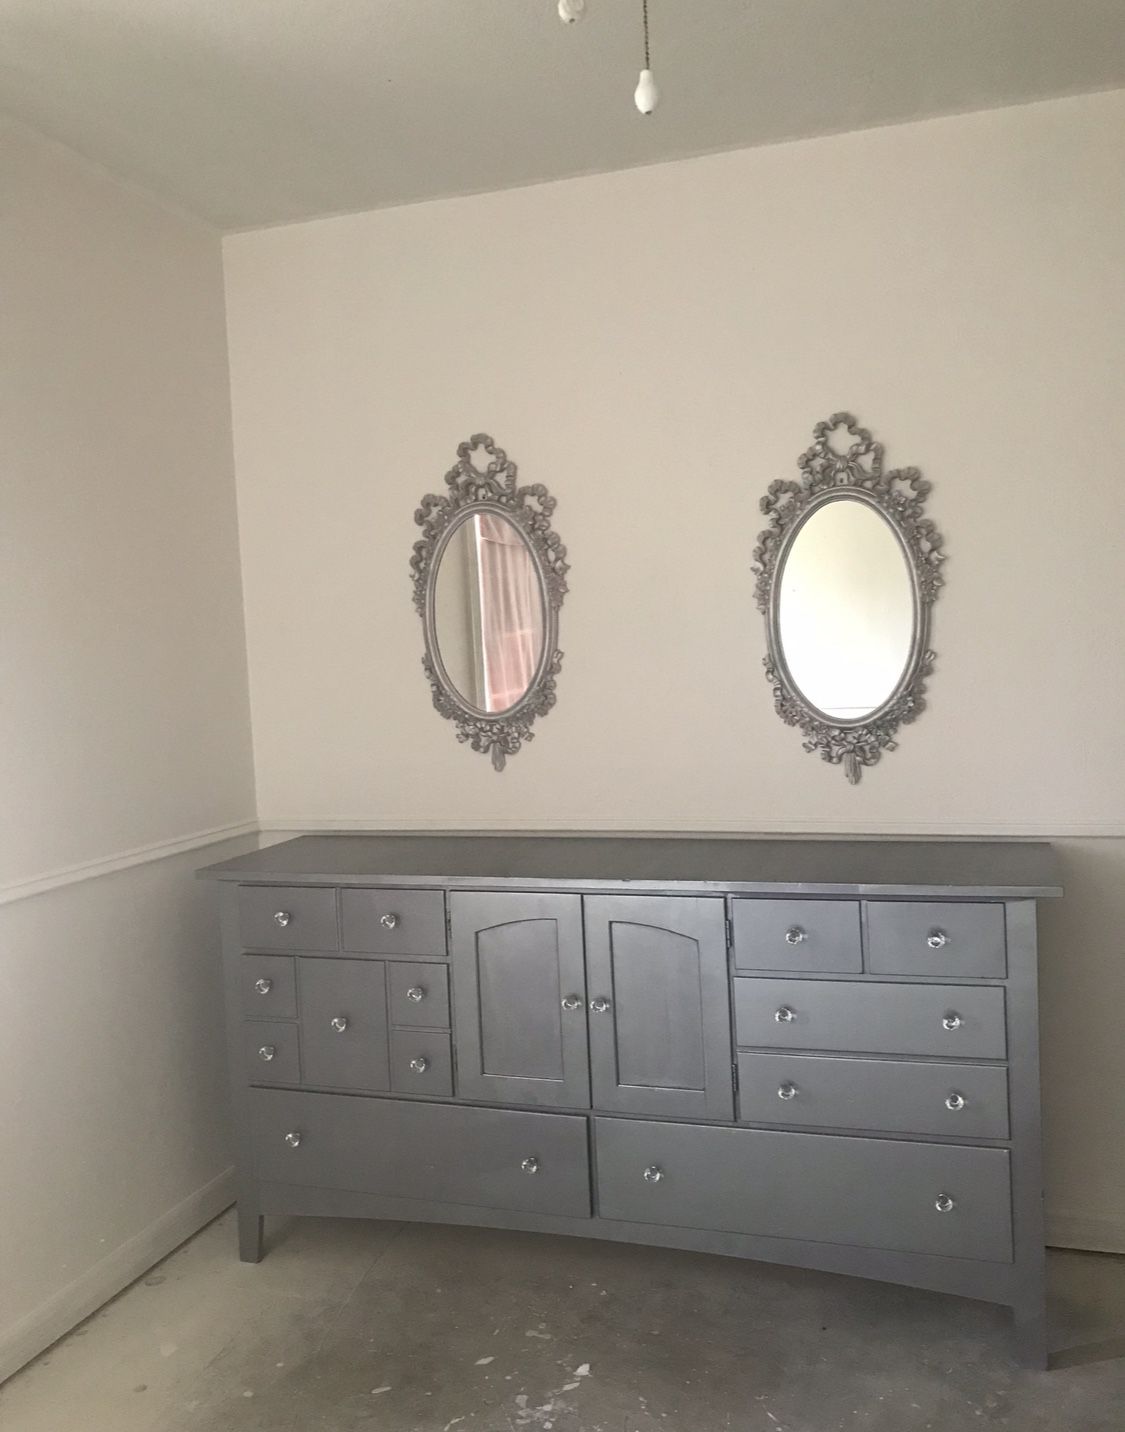 Pennsylvania House Double Dresser Refinished In Silver W Crystal Knobs And Matching Antique Frames